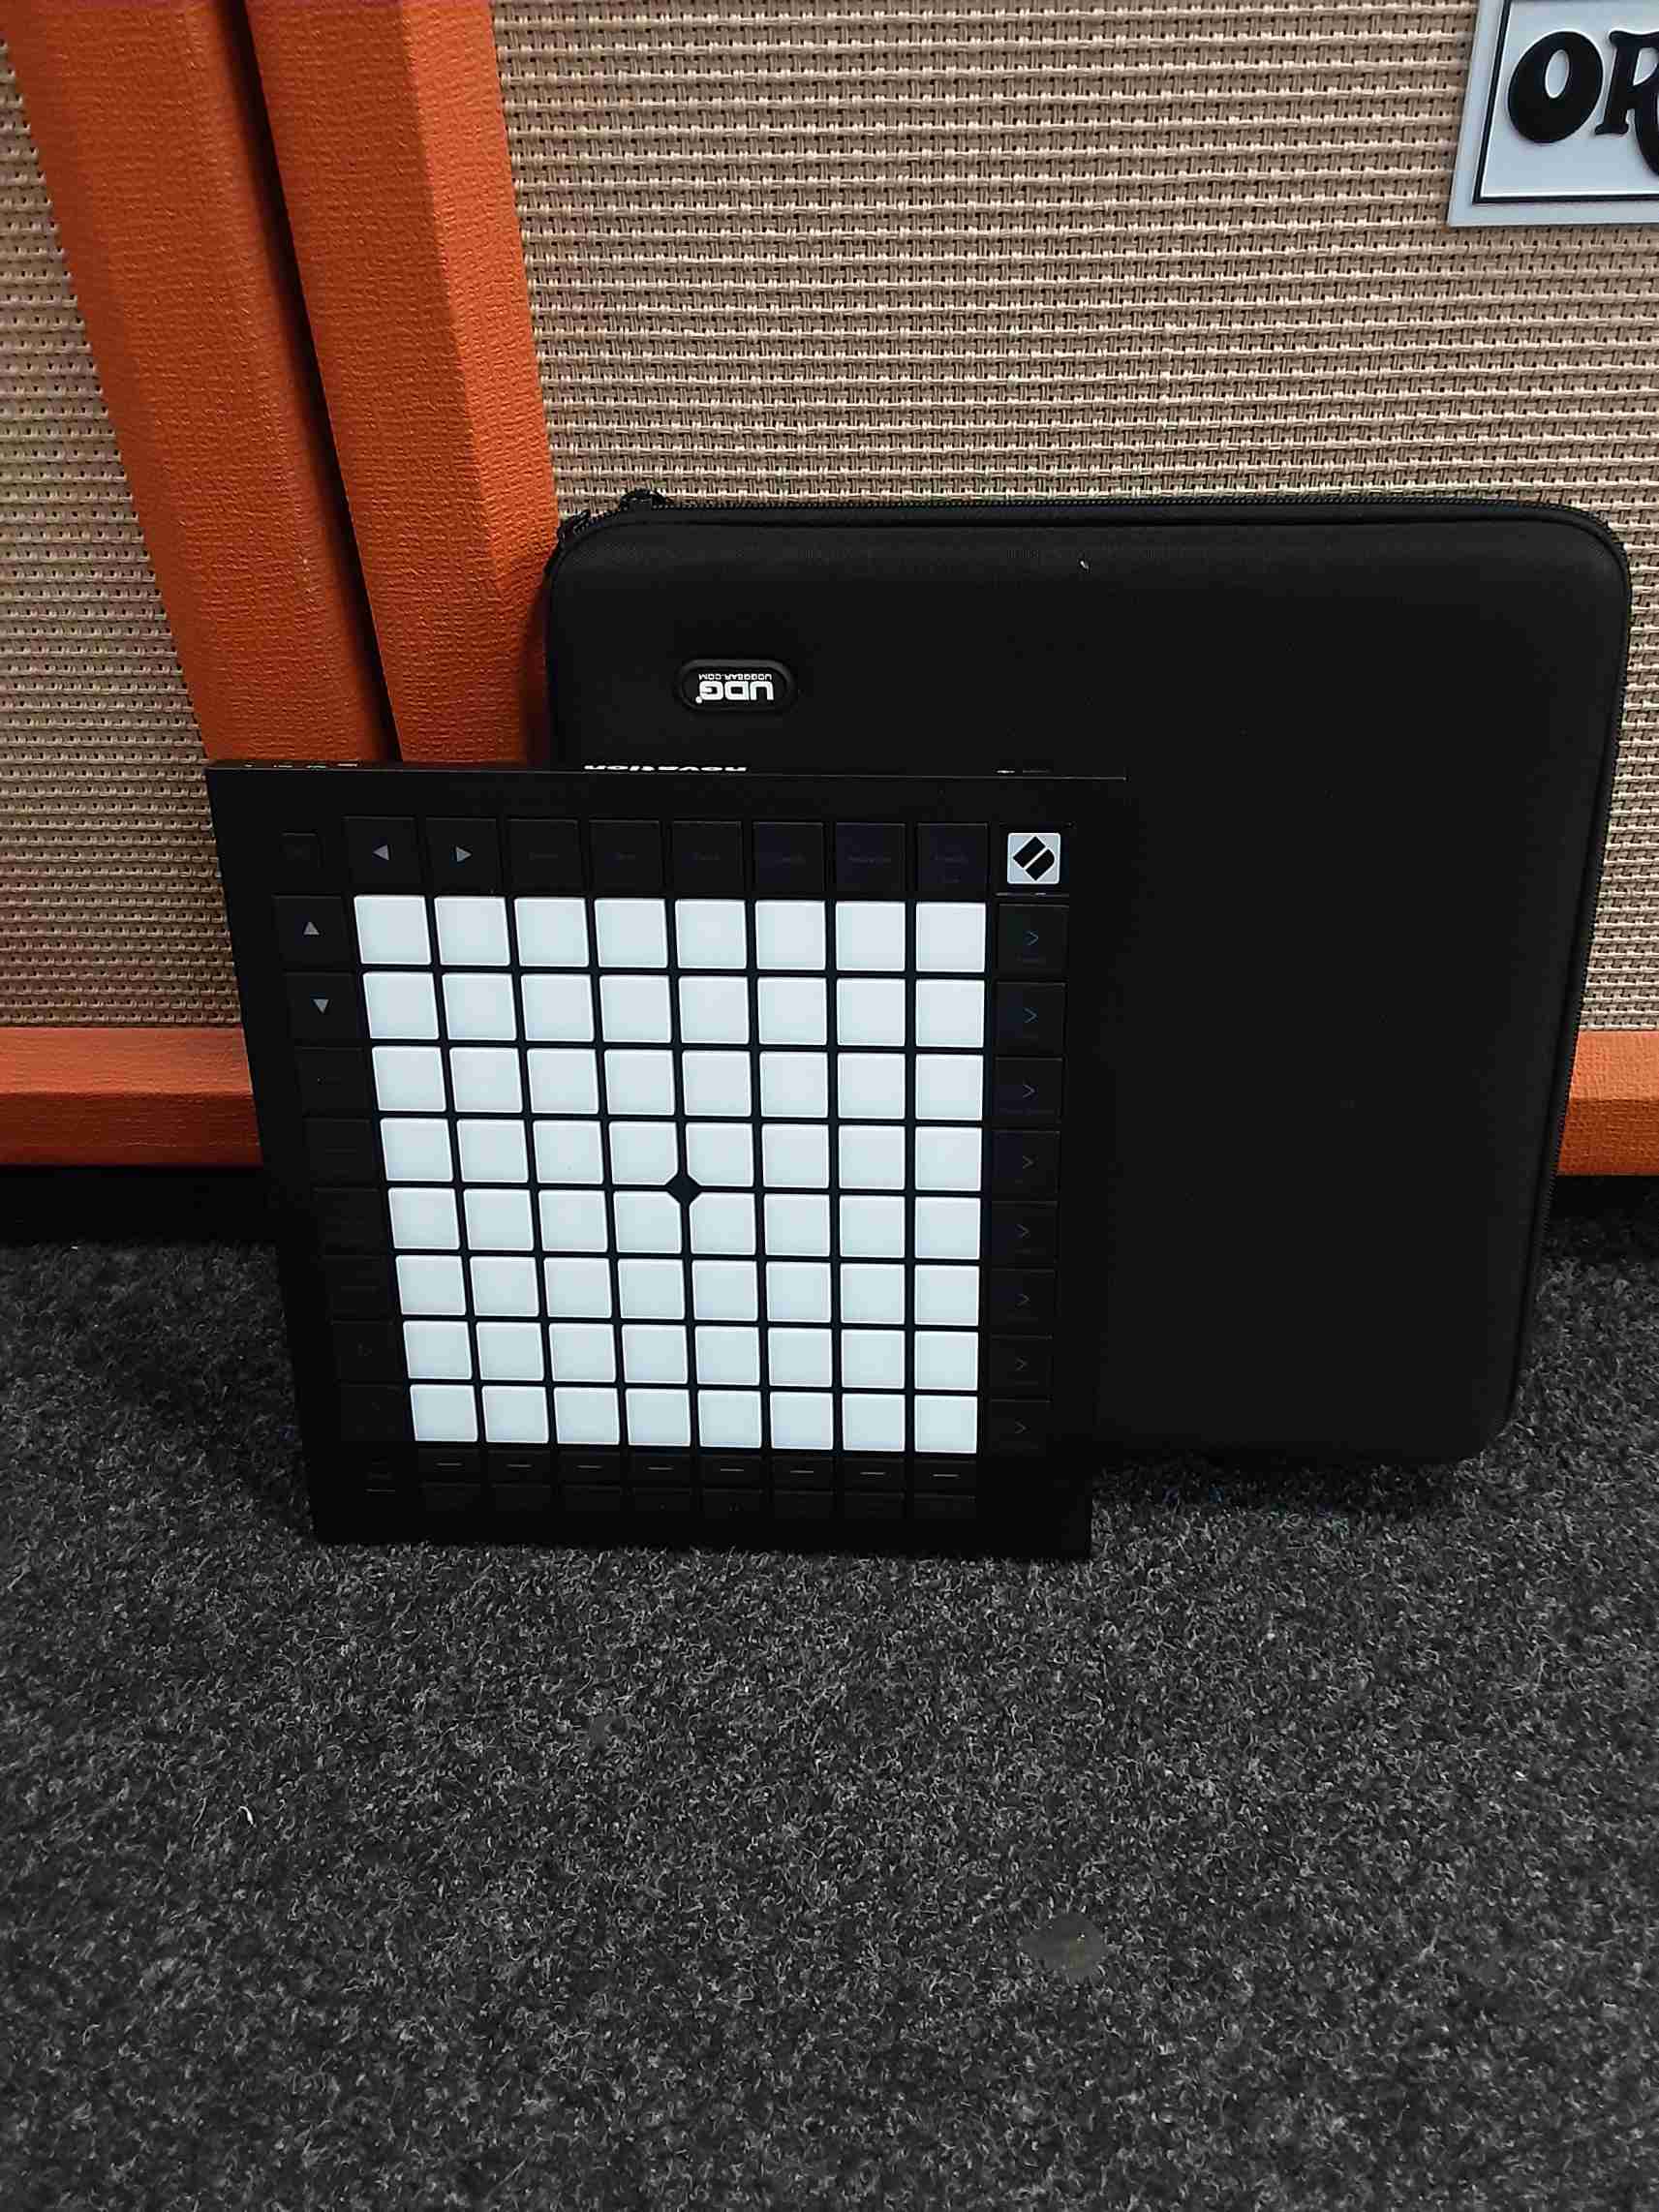 An image of Pre-Owned Novation Launchpad Pro MK3 (046003) | PMT Online